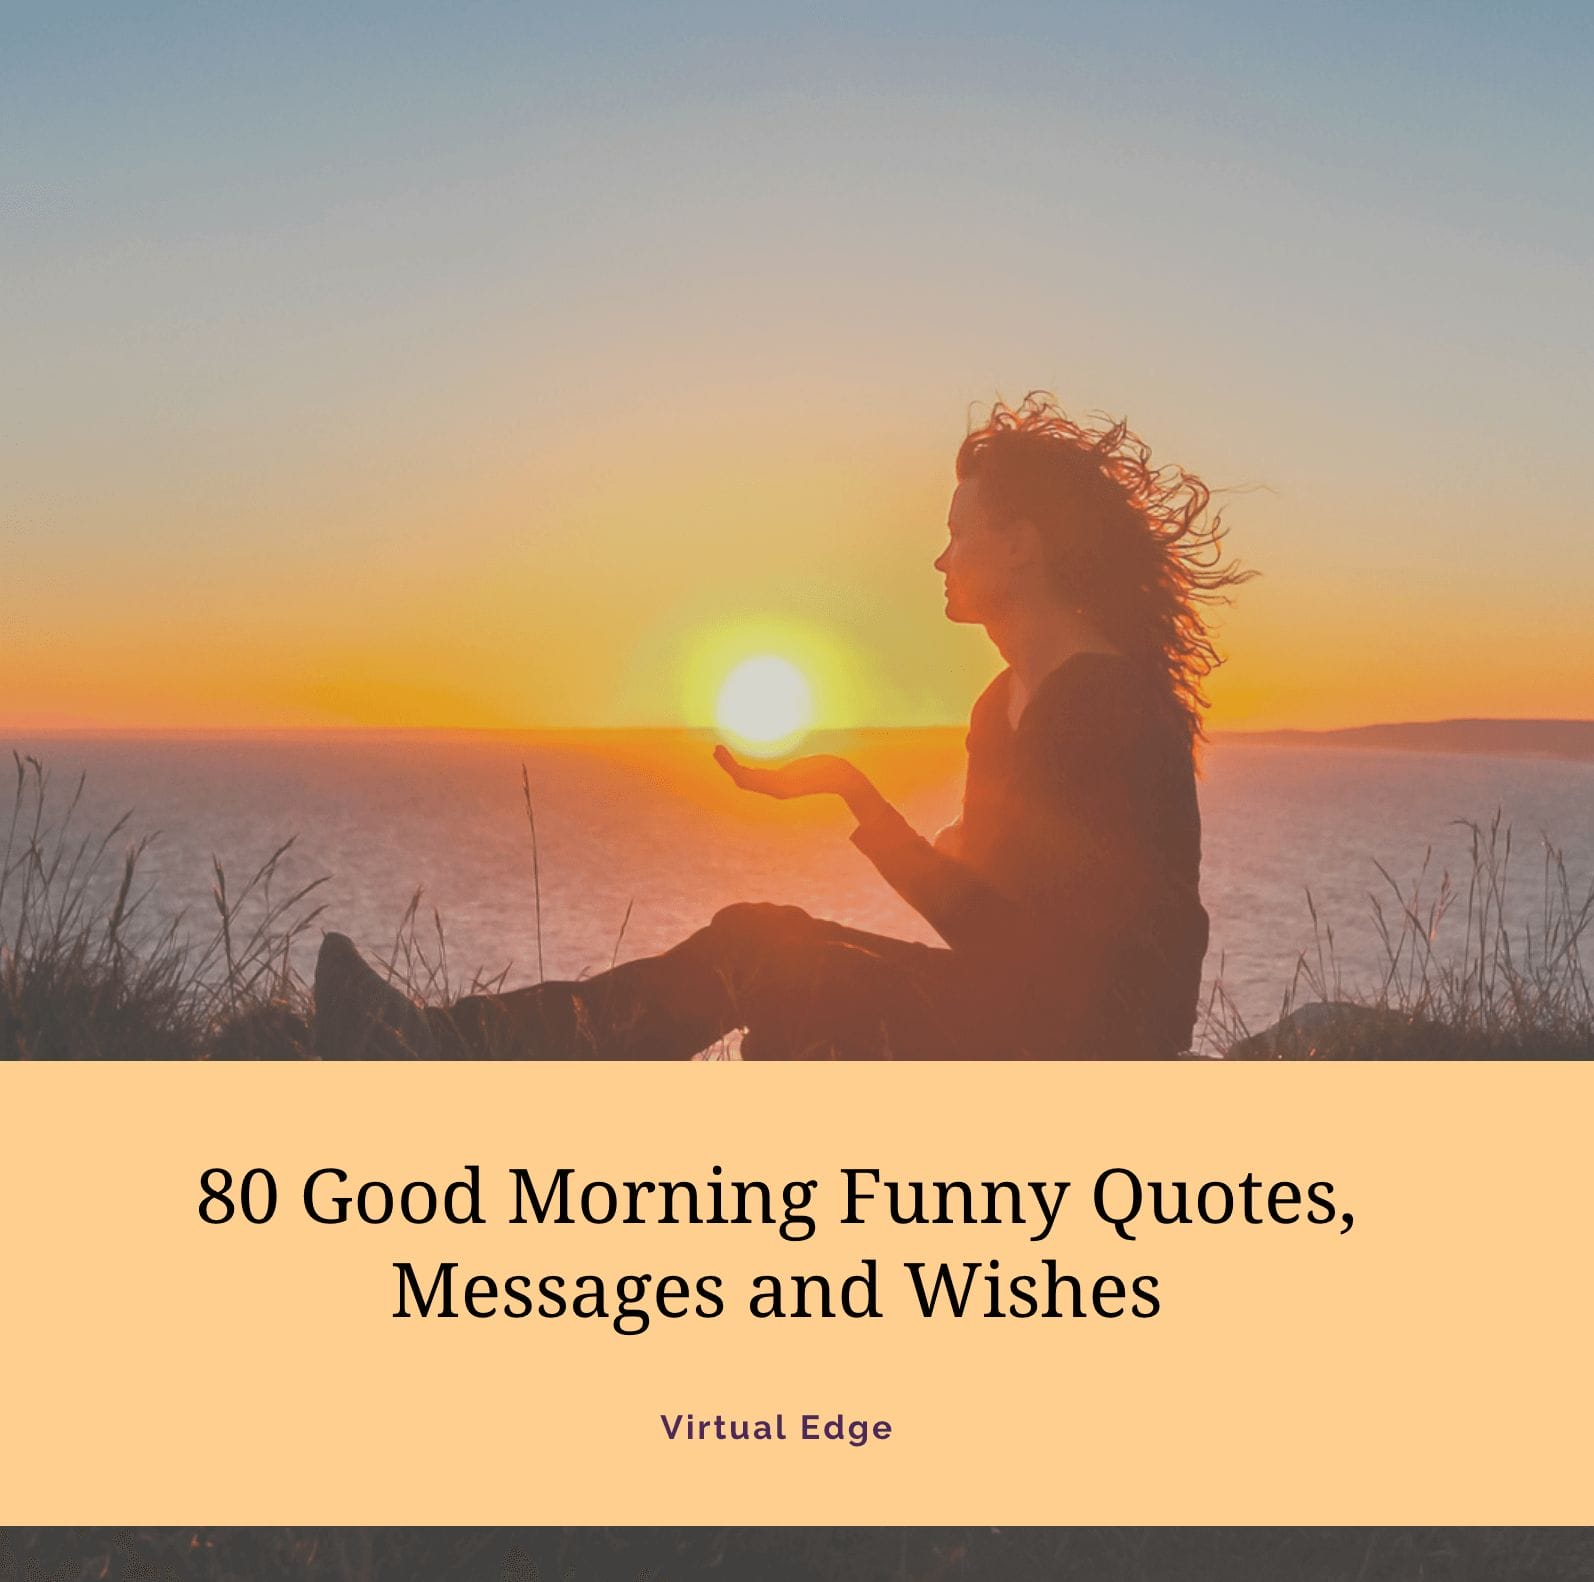 80 Good Morning Funny Quotes, Messages and Wishes